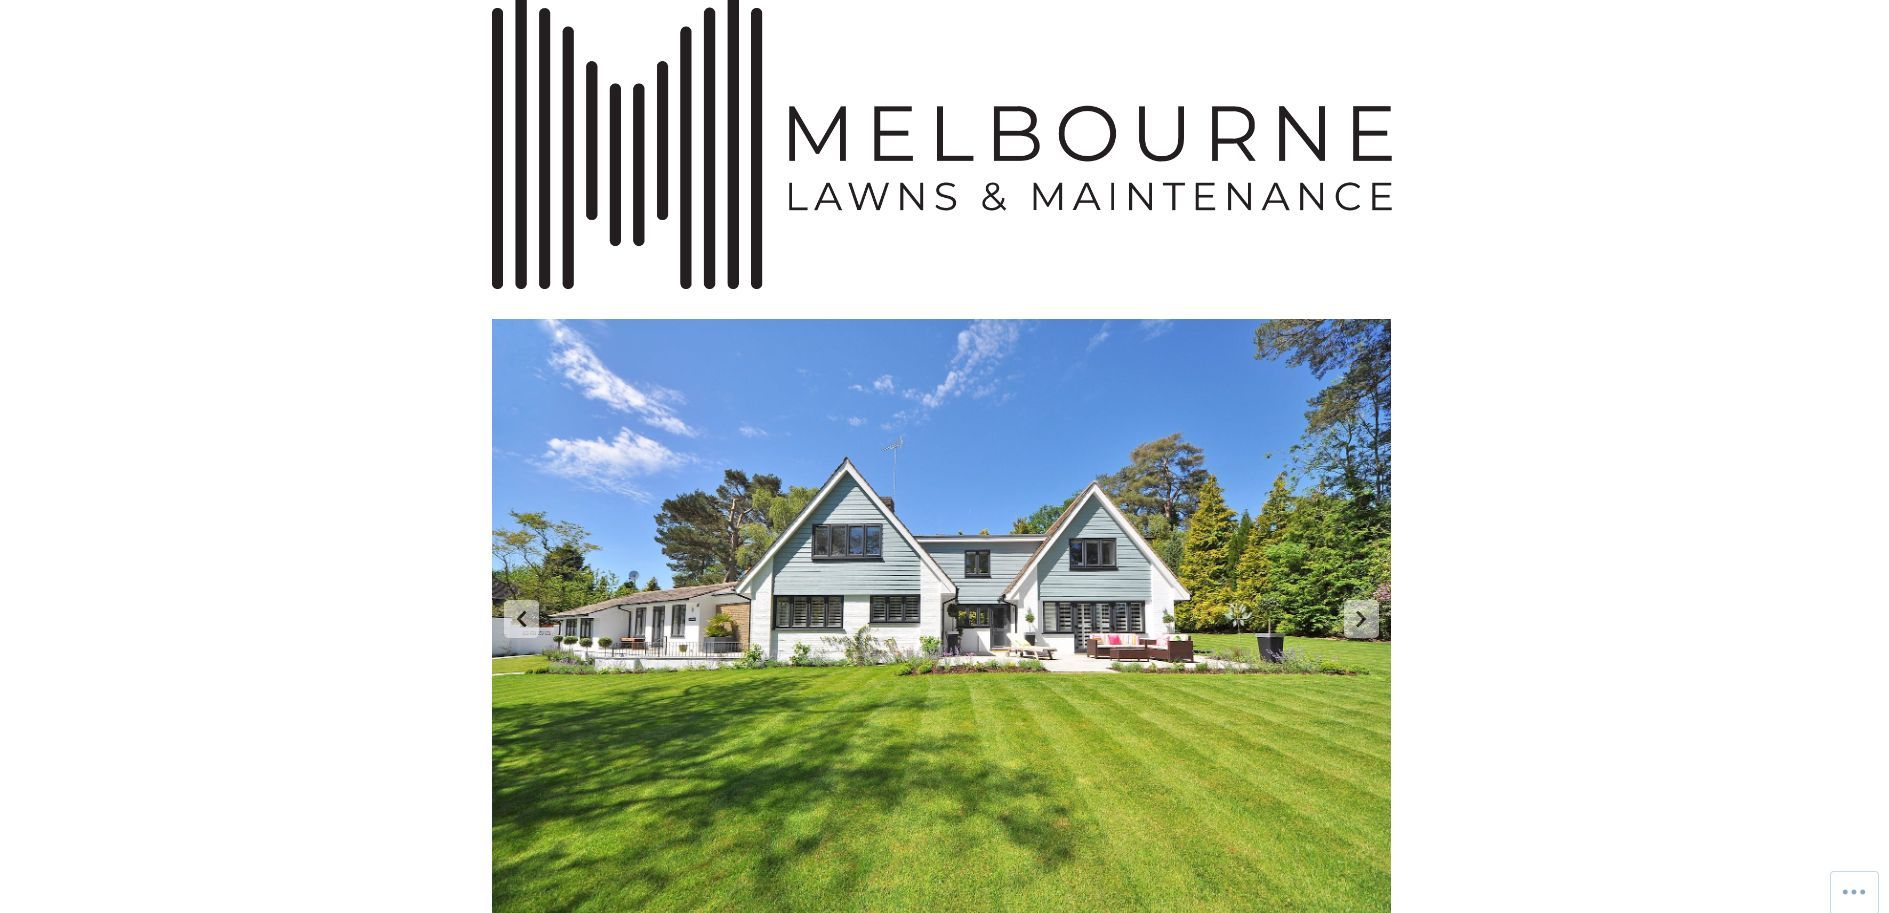 melbourne lawns and maintenace – lawn mowing, open space and grounds maintenance 2023 10 19 22 17 28